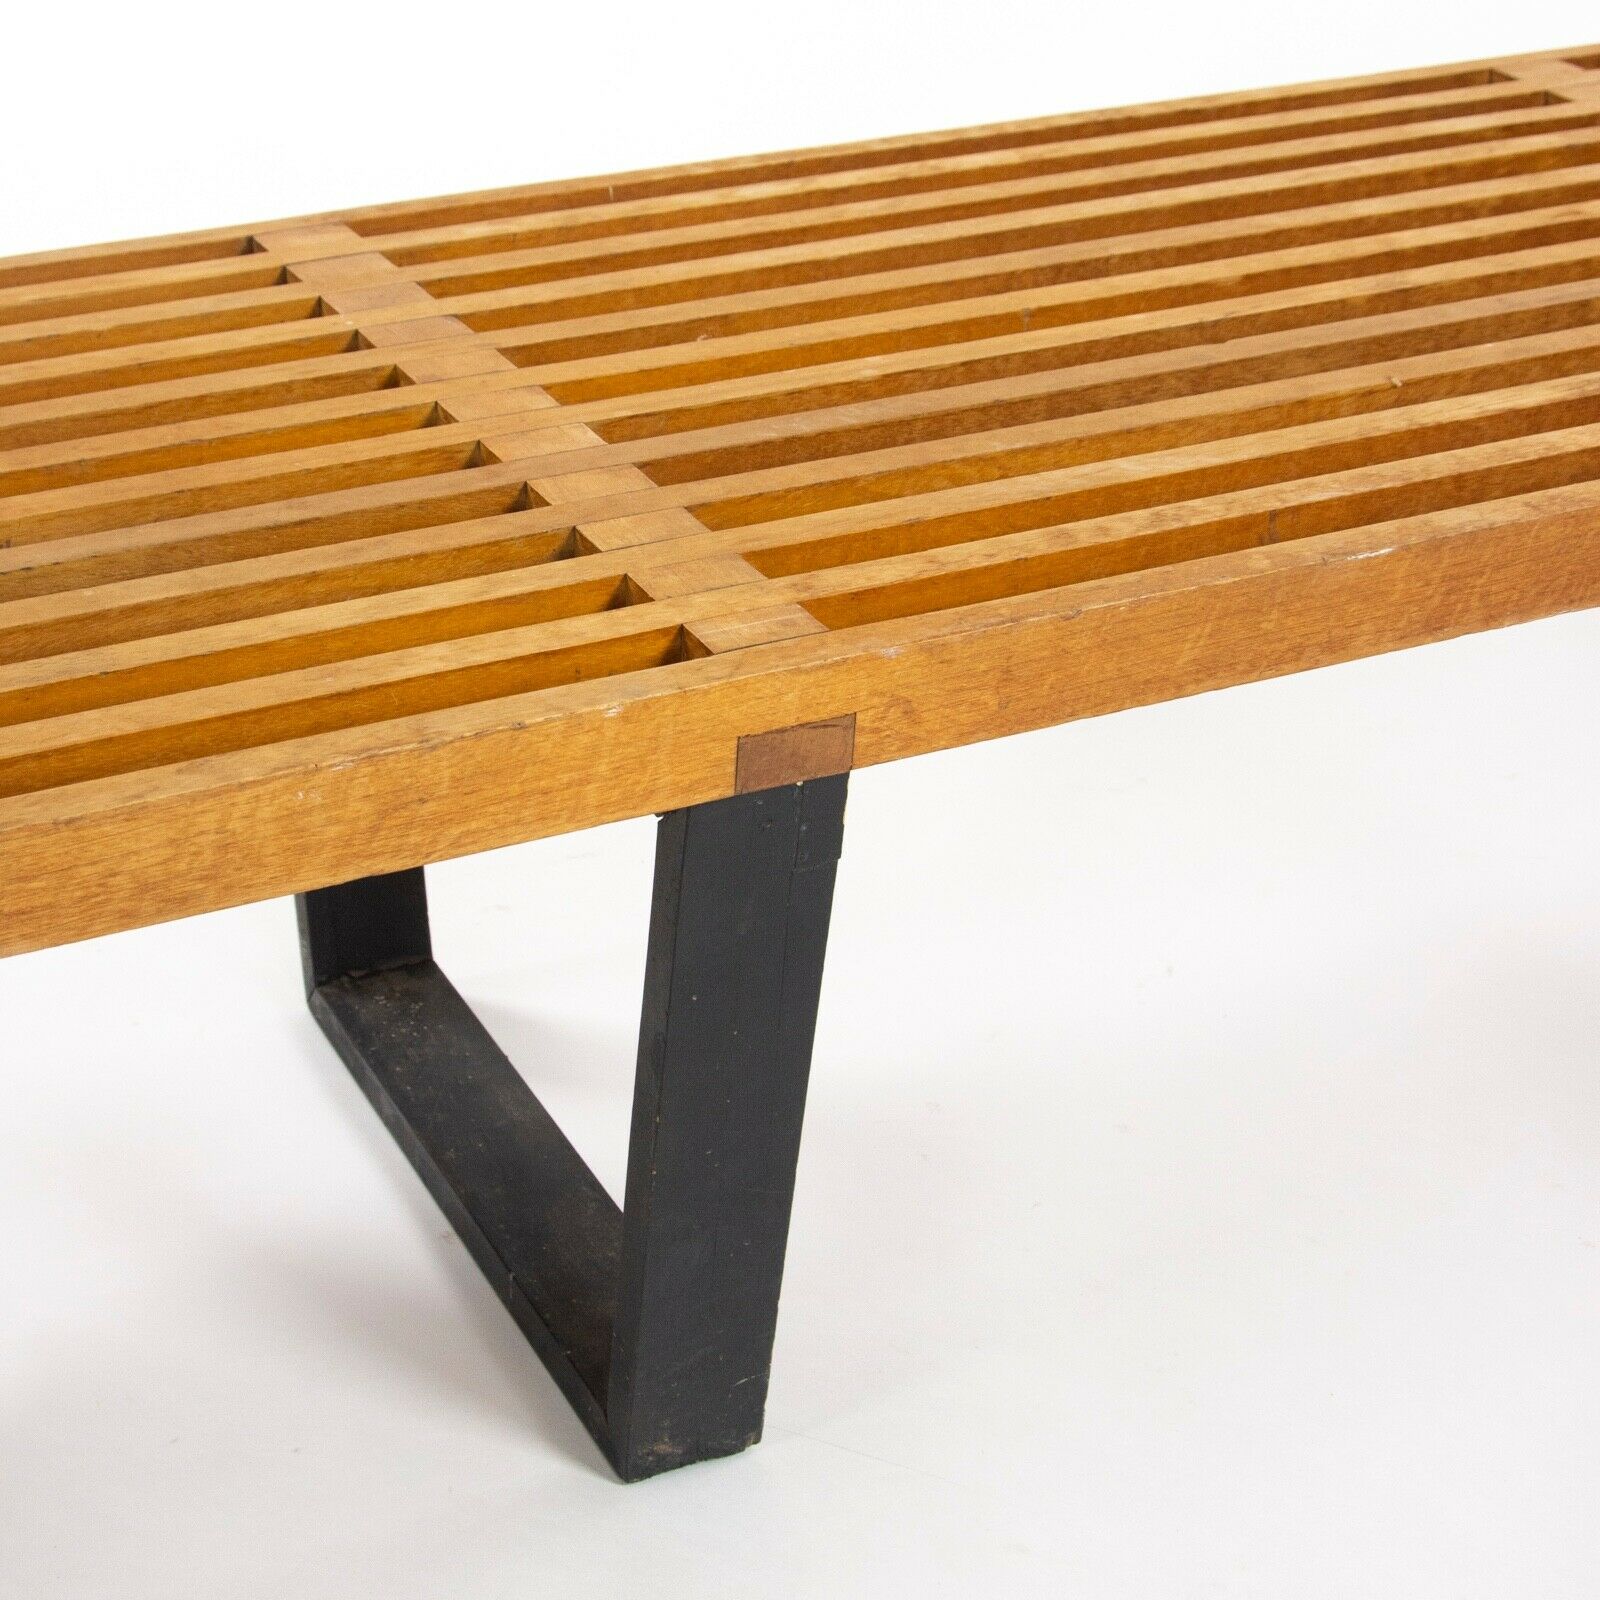 SOLD 1950s Rare George Nelson for Herman Miller 102 inch 4992 Slat Bench Maple Black Laquer